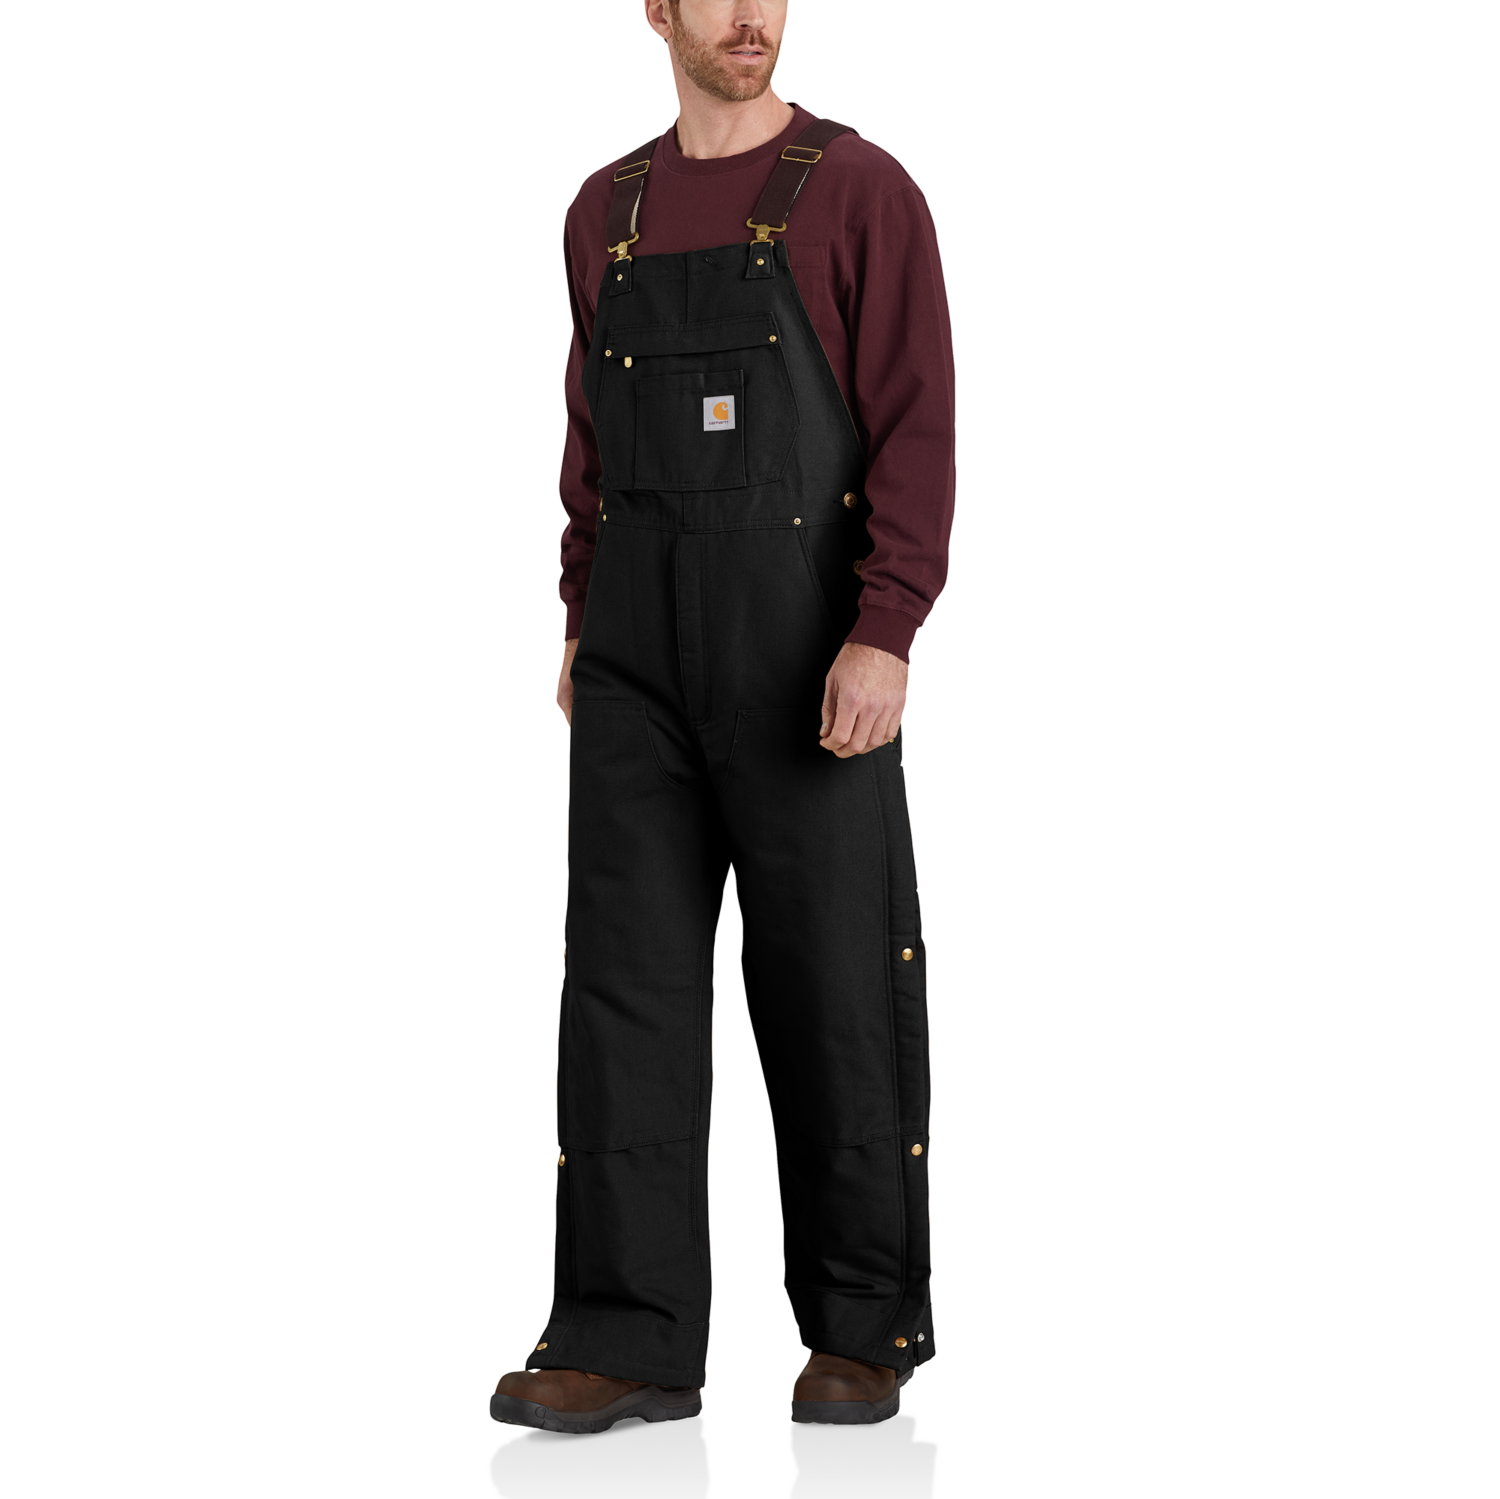 FIRM_DUCK_INSULATED_BIB_OVERALL_yYXf8T6Hi3